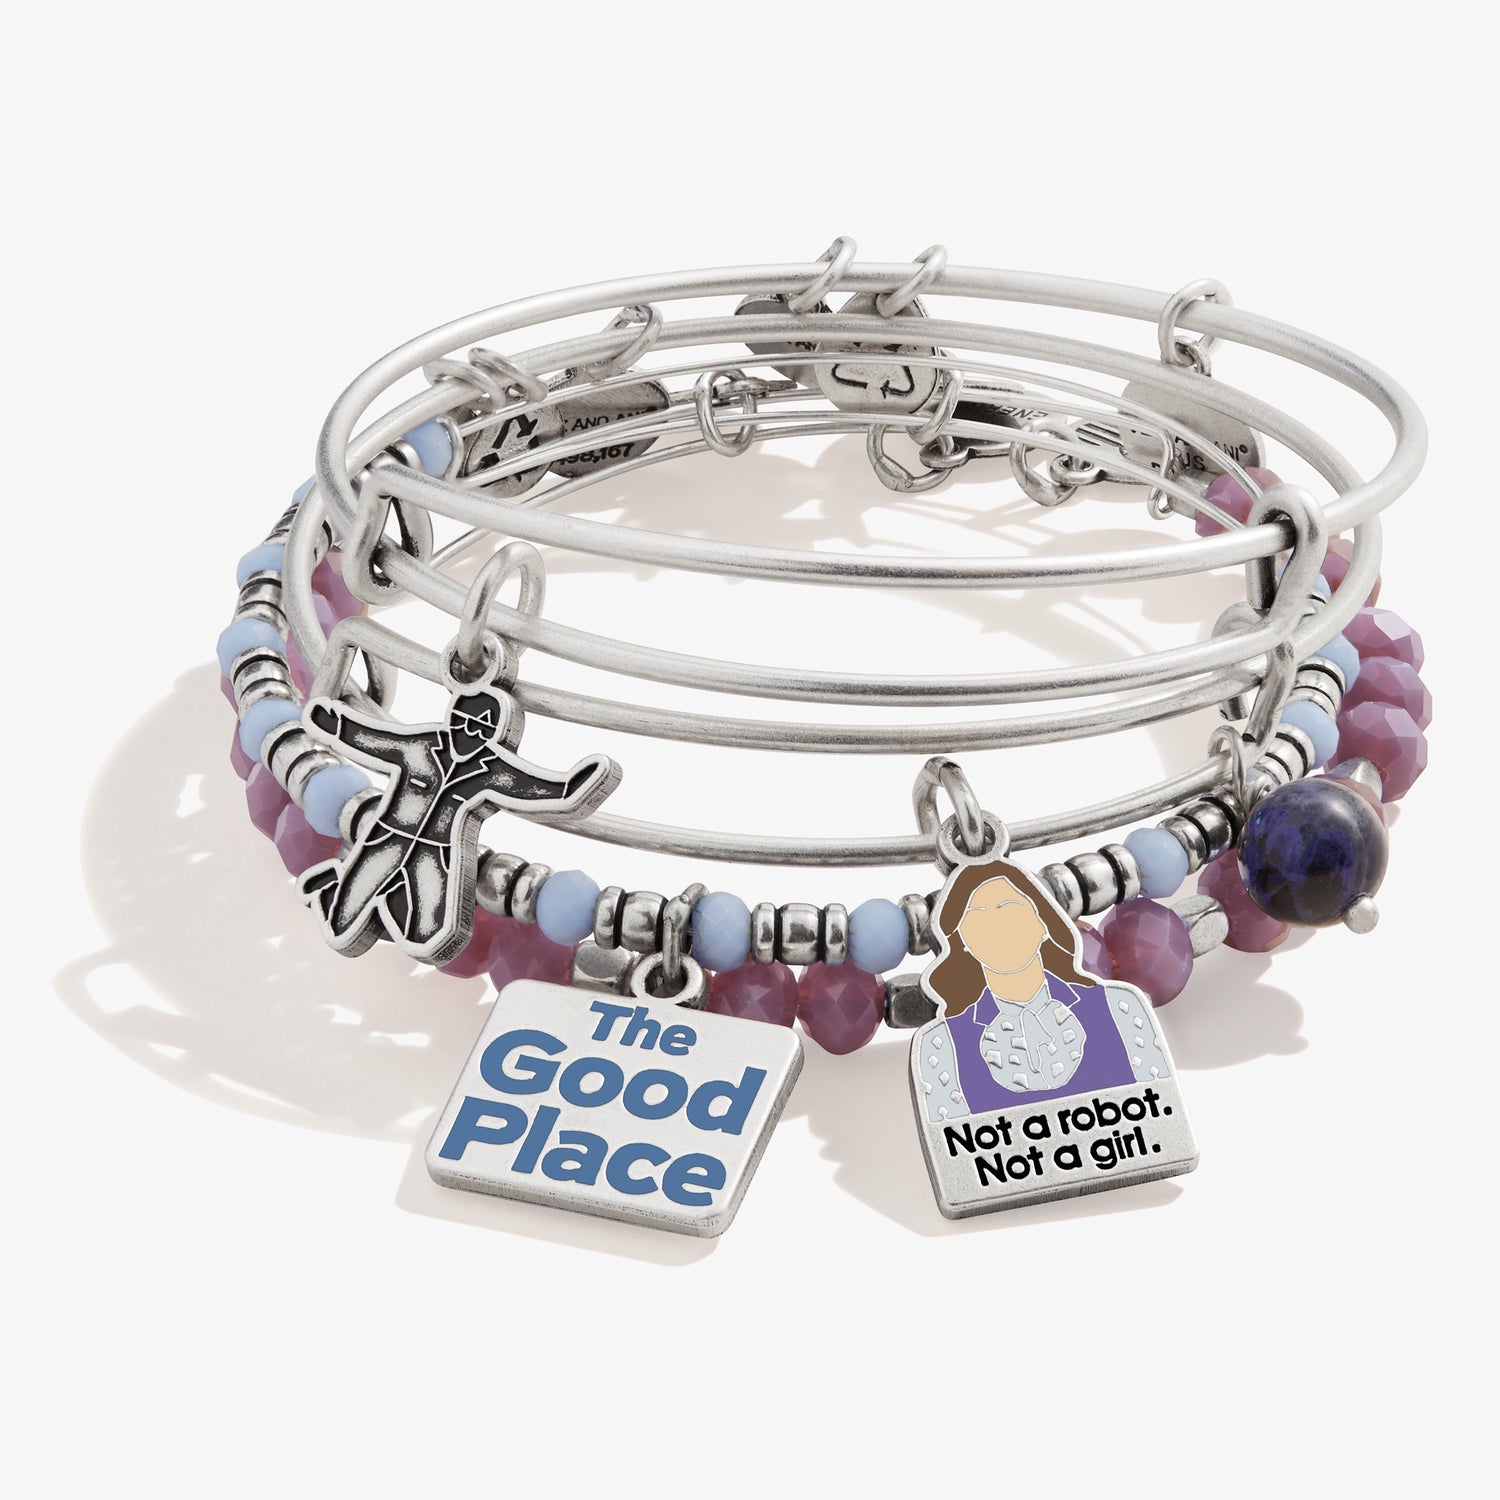 The Good Place™ Charm Bangles, Set of 4